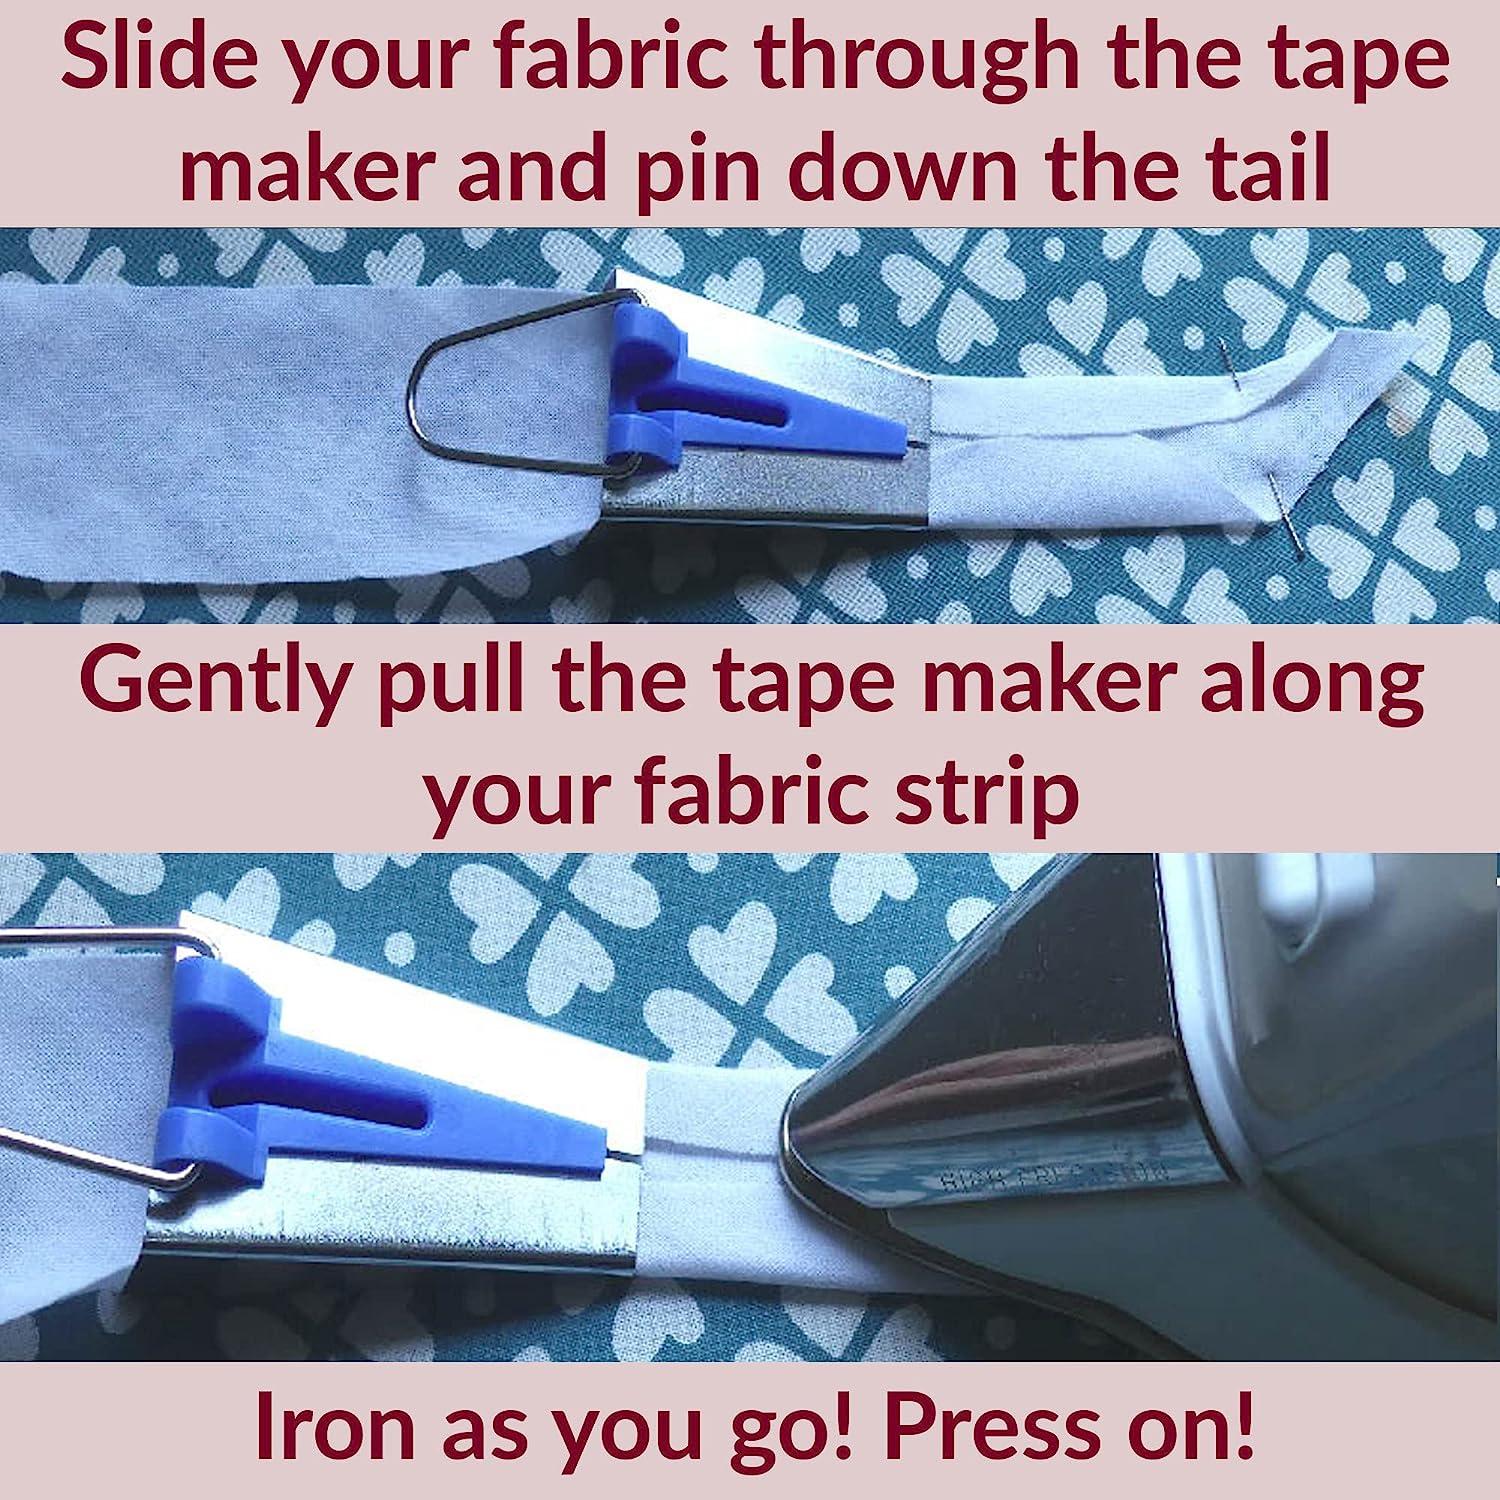 How to Use A Bias Tape Maker, Review of Madam Sew Bias Tape Maker